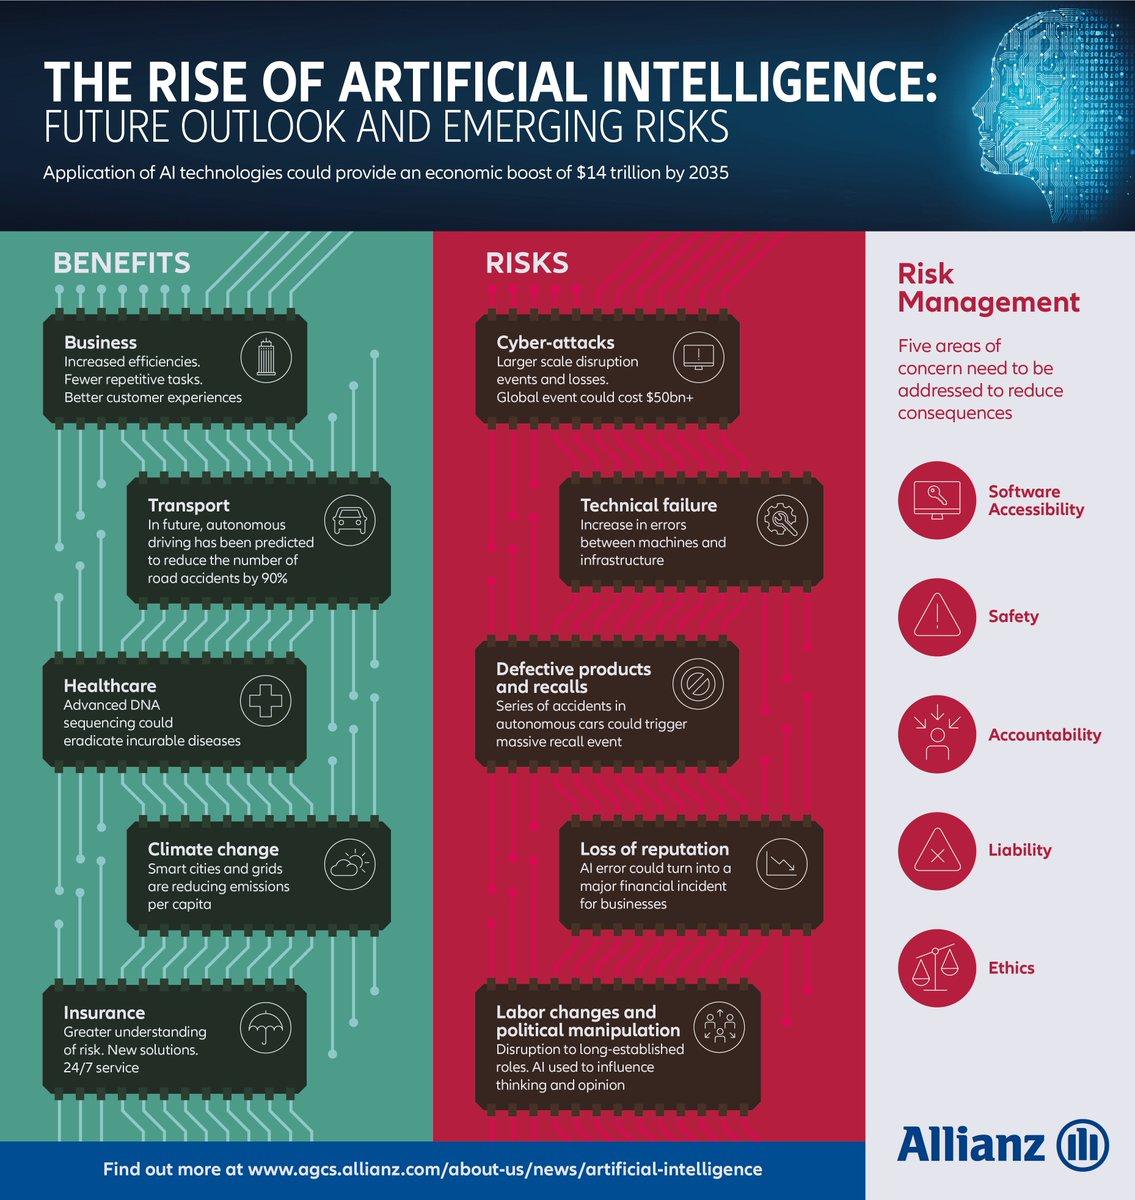 The Use of Artificial Intelligence in Insurance